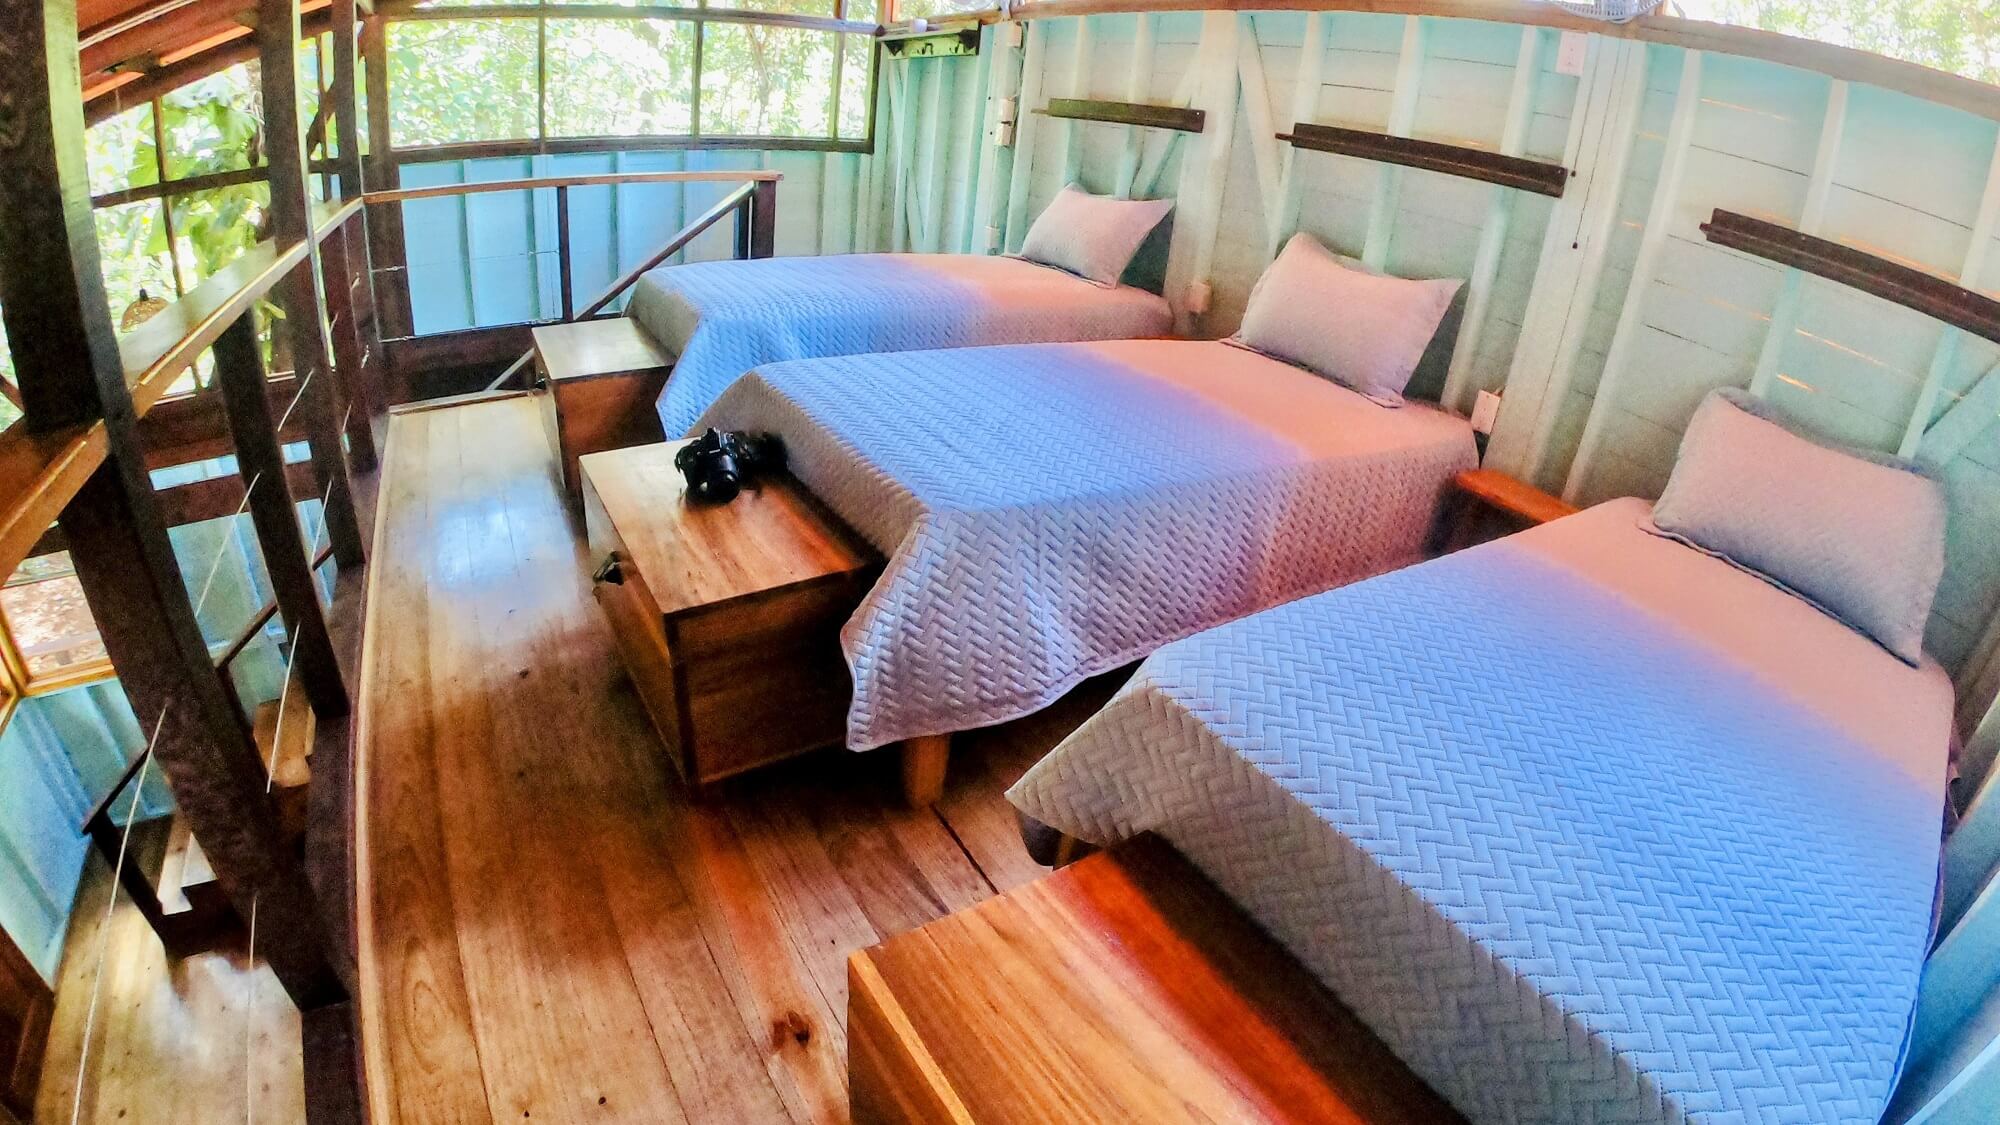 A room with three beds and wooden floors